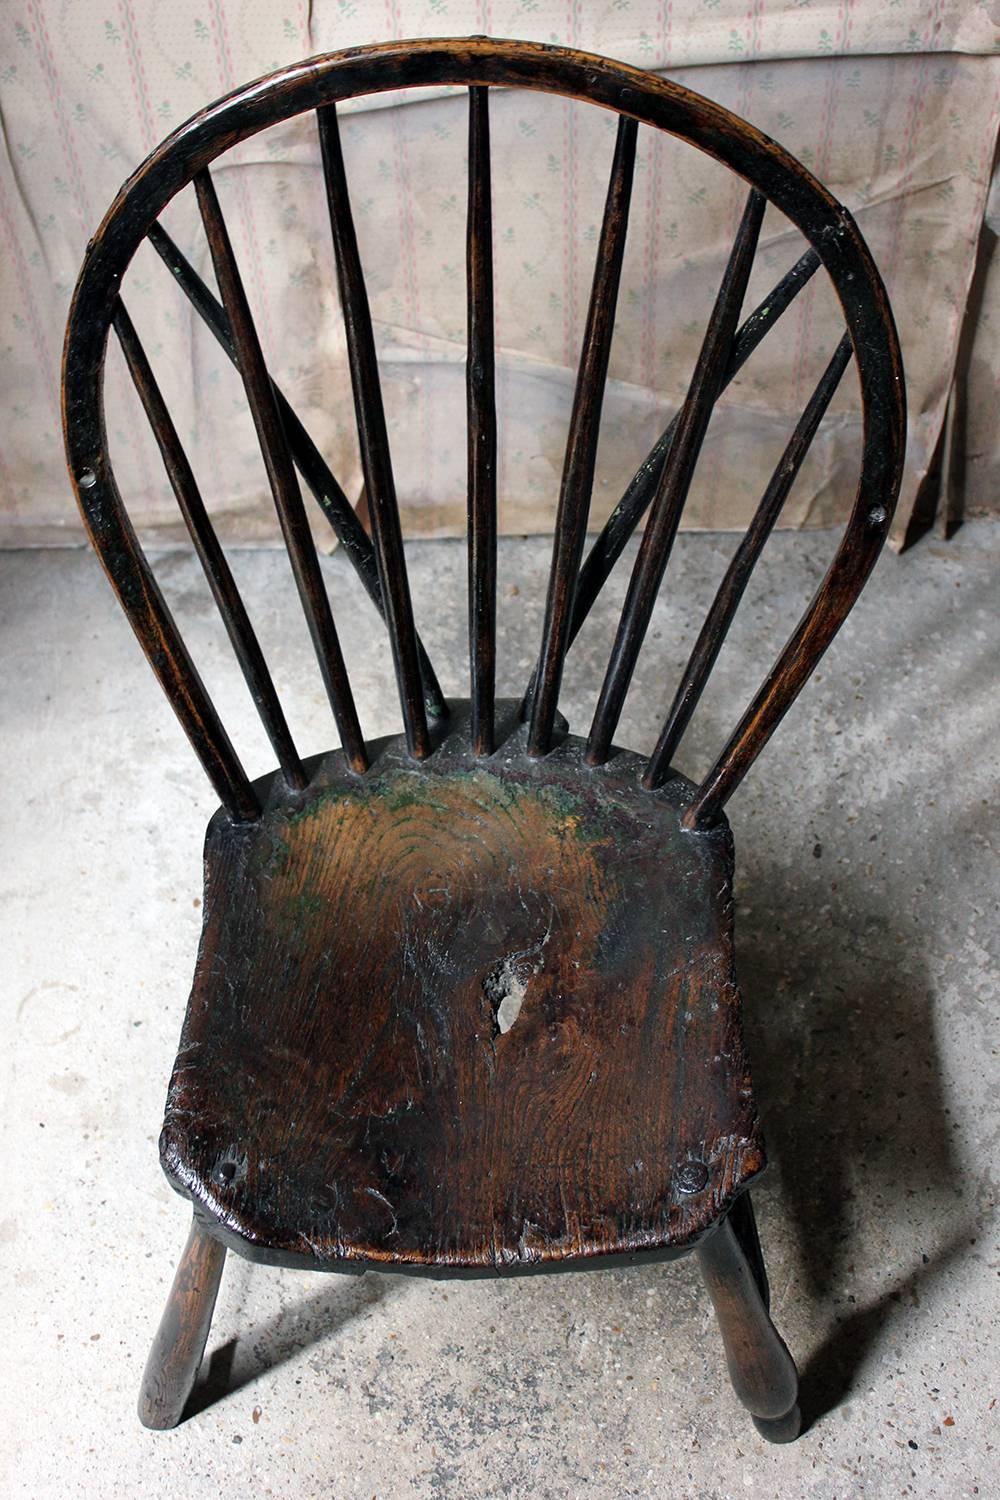 Early 19th Century English West-Country Black Painted Braced Bow-Back Windsor Chair, circa 1800